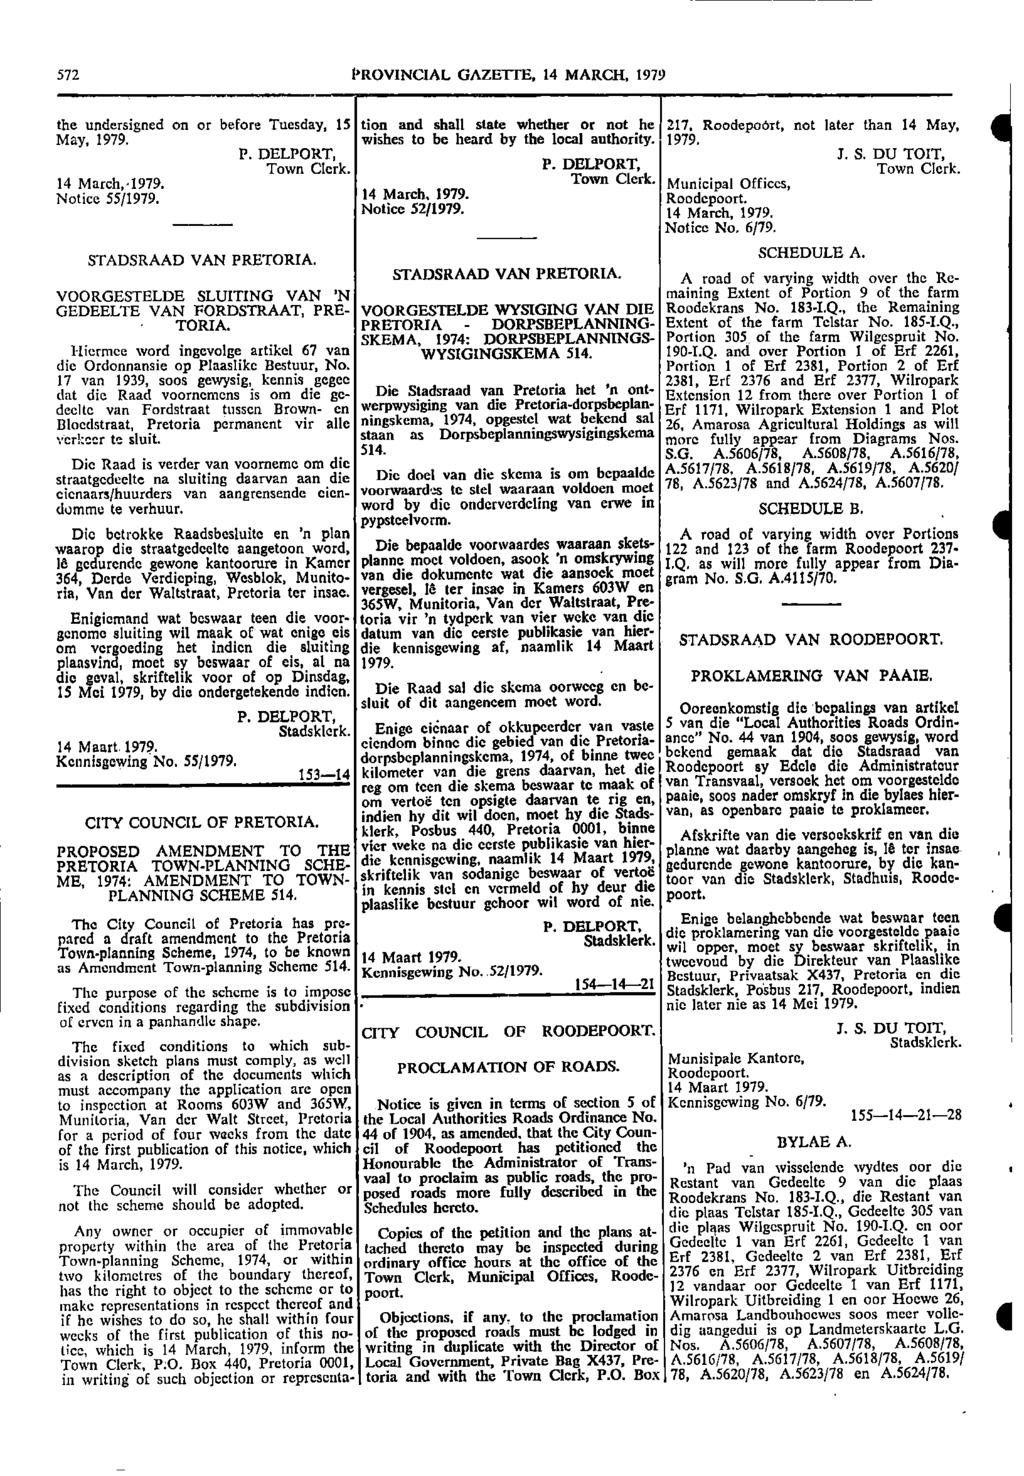 572 PROVNCAL GAZETTE 4 MARCH 979 the undersigned on or before Tuesday 5 tion and shall state whether or not he 27 Roodepoort not later than 4 May May 979 wishes to be heard by the local authority 979